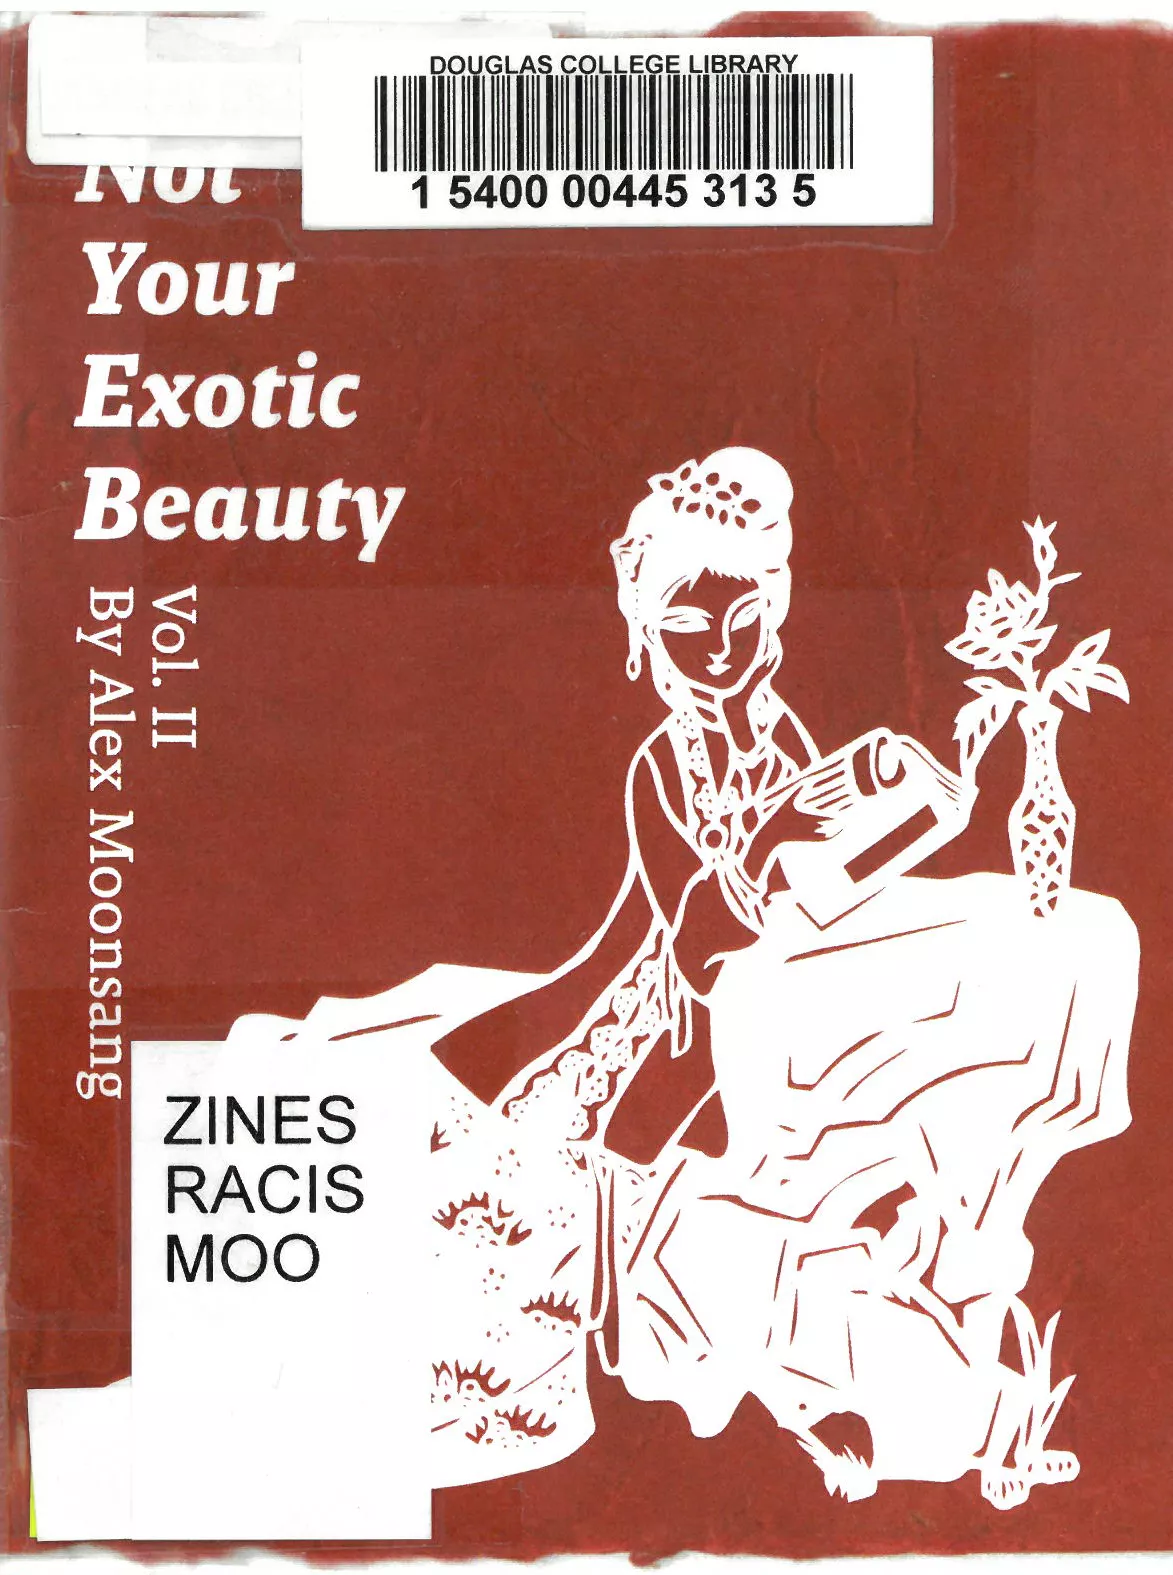 Not your exotic beauty